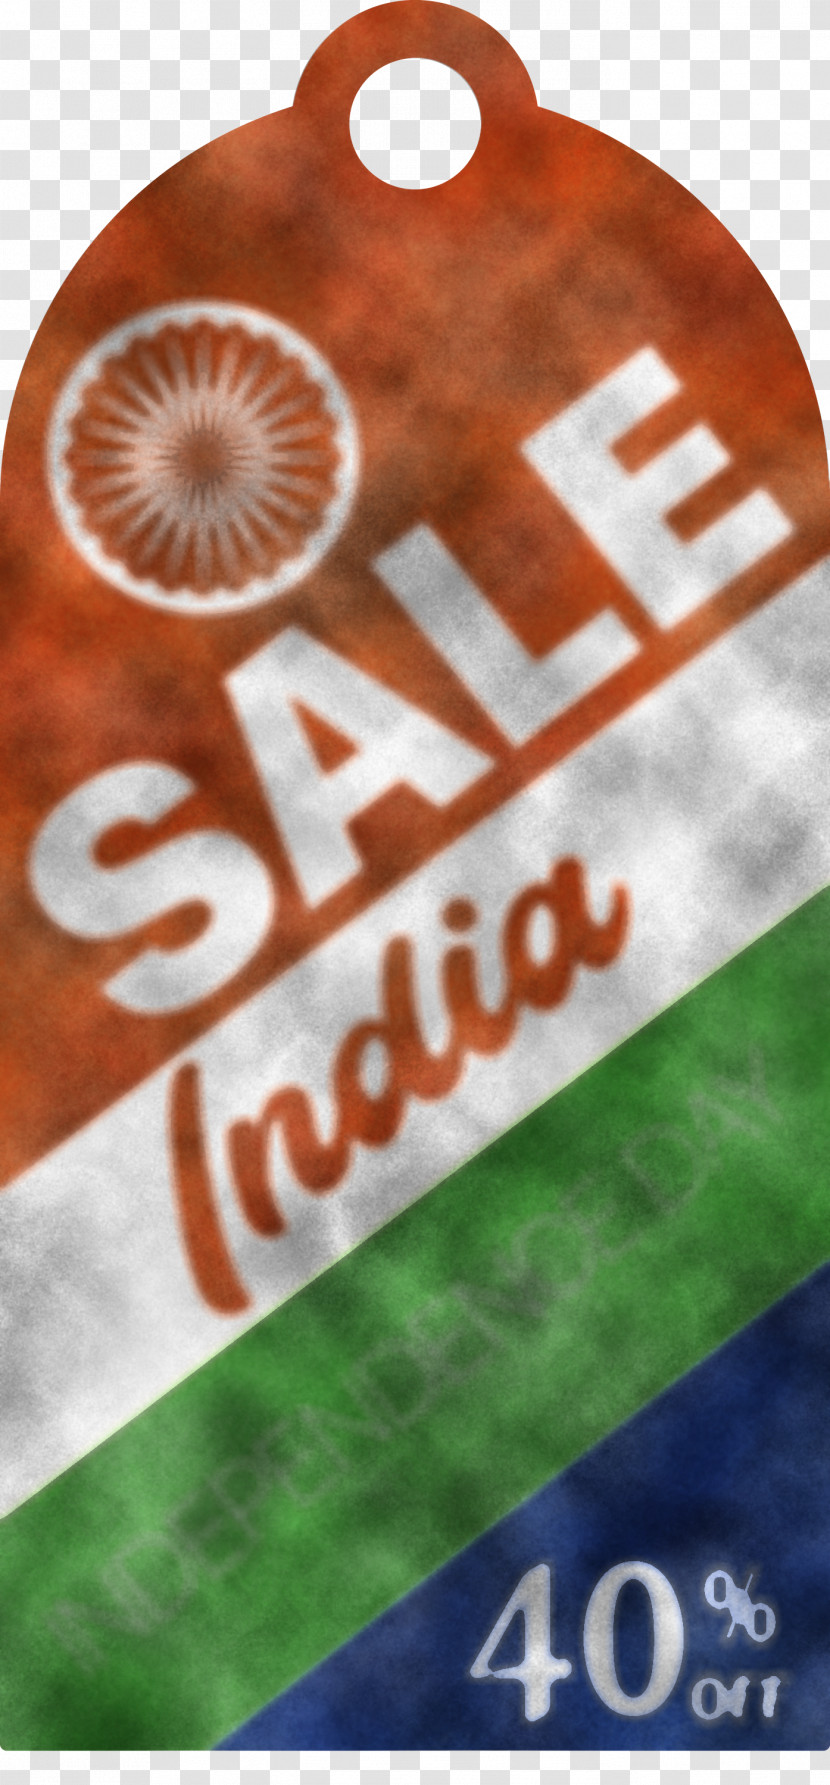 India Indenpendence Day Sale Tag India Indenpendence Day Sale Label Transparent PNG